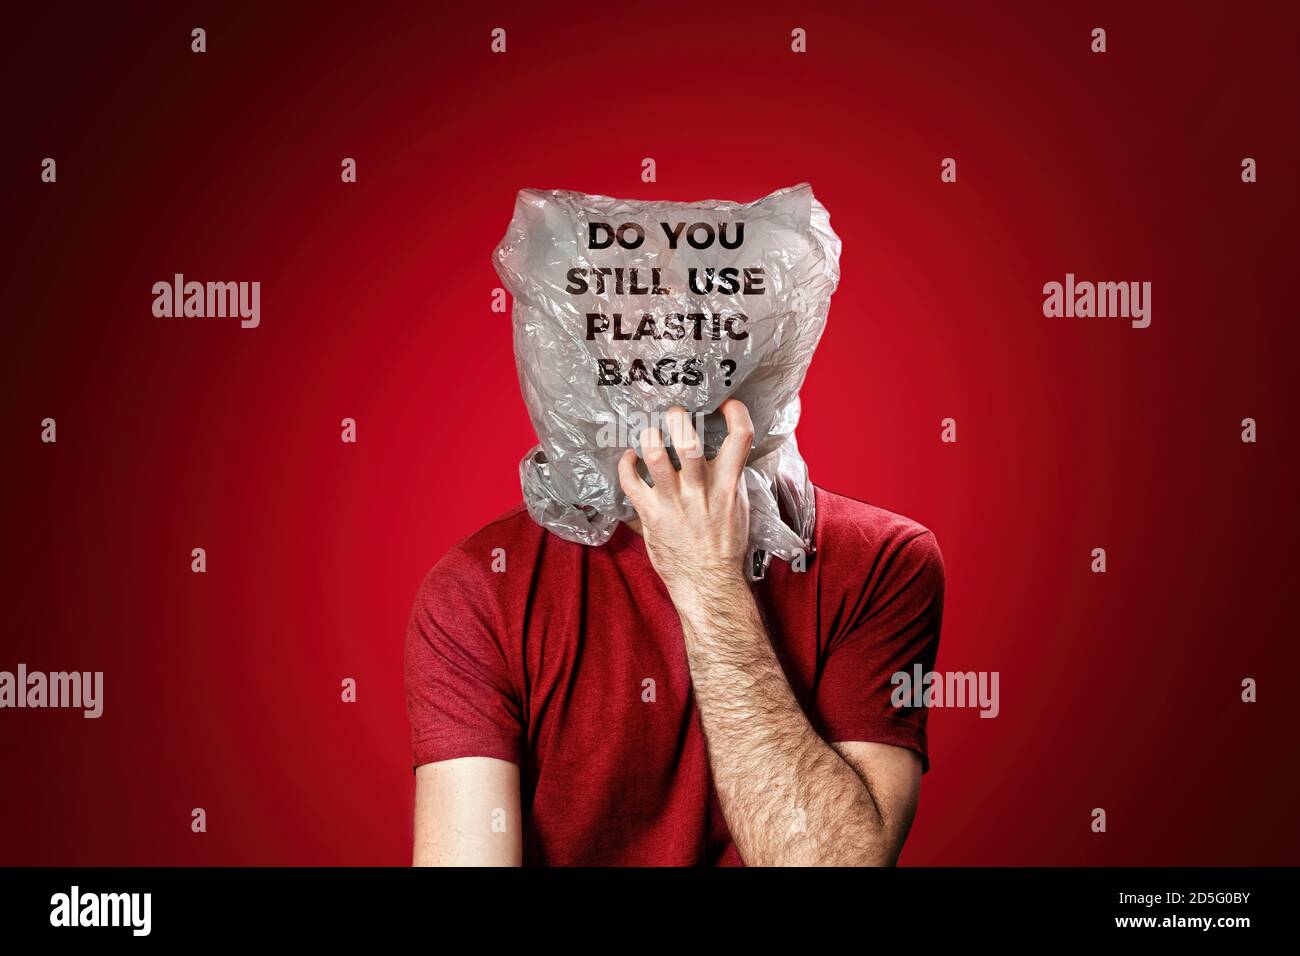 The man reaches for his mouth, feeling suffocated in a plastic bag. Red background. Concept of pollution and environmental protection. Stock Photo